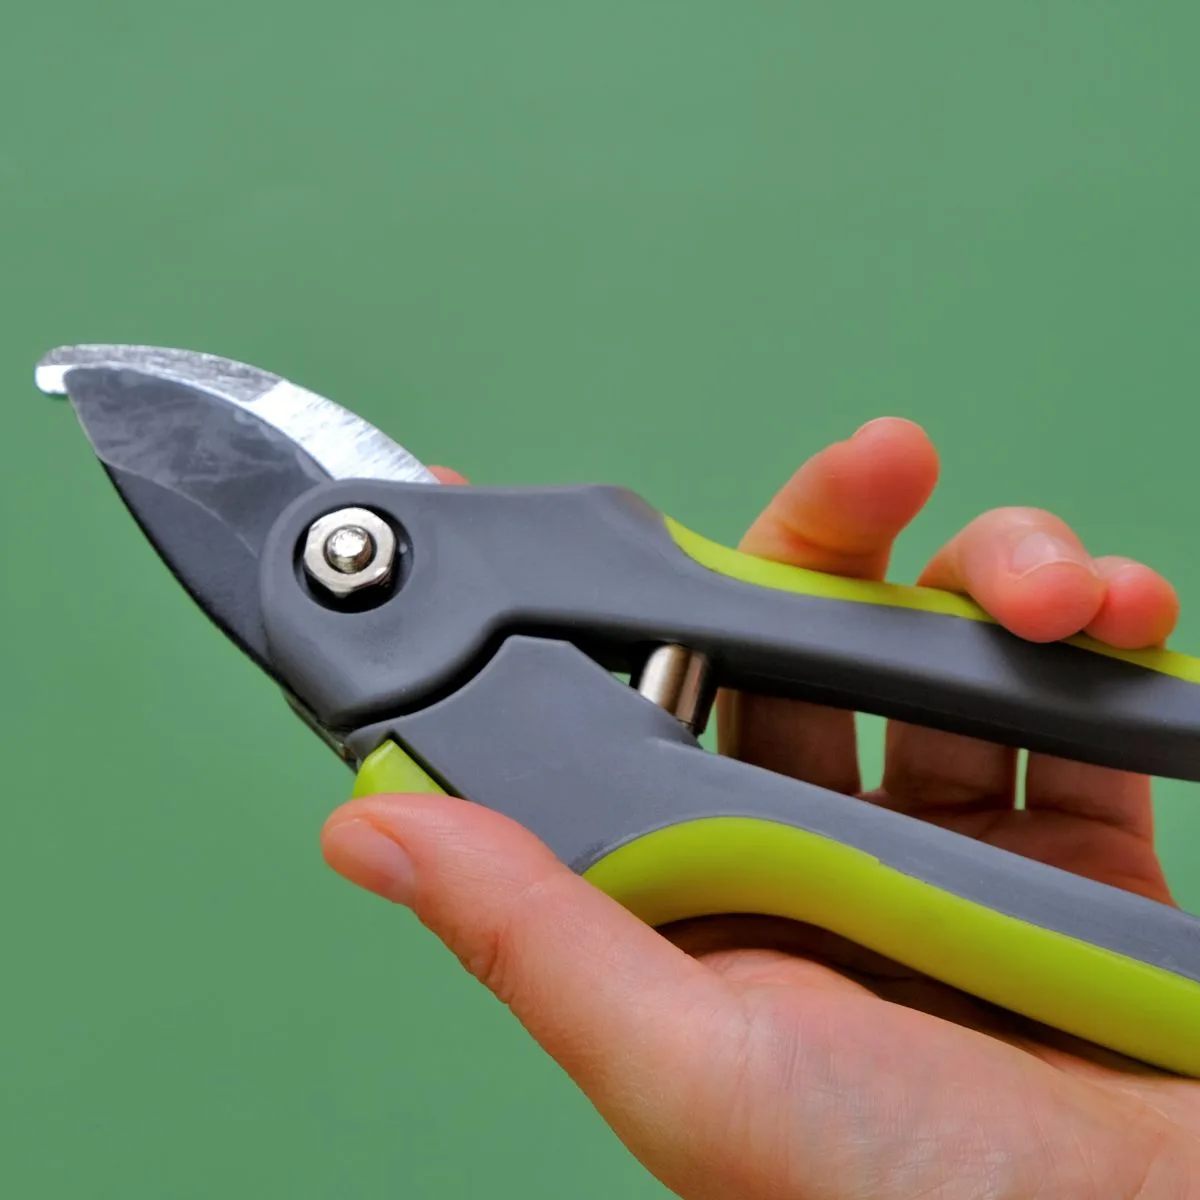 A hand holding a pruning tool.